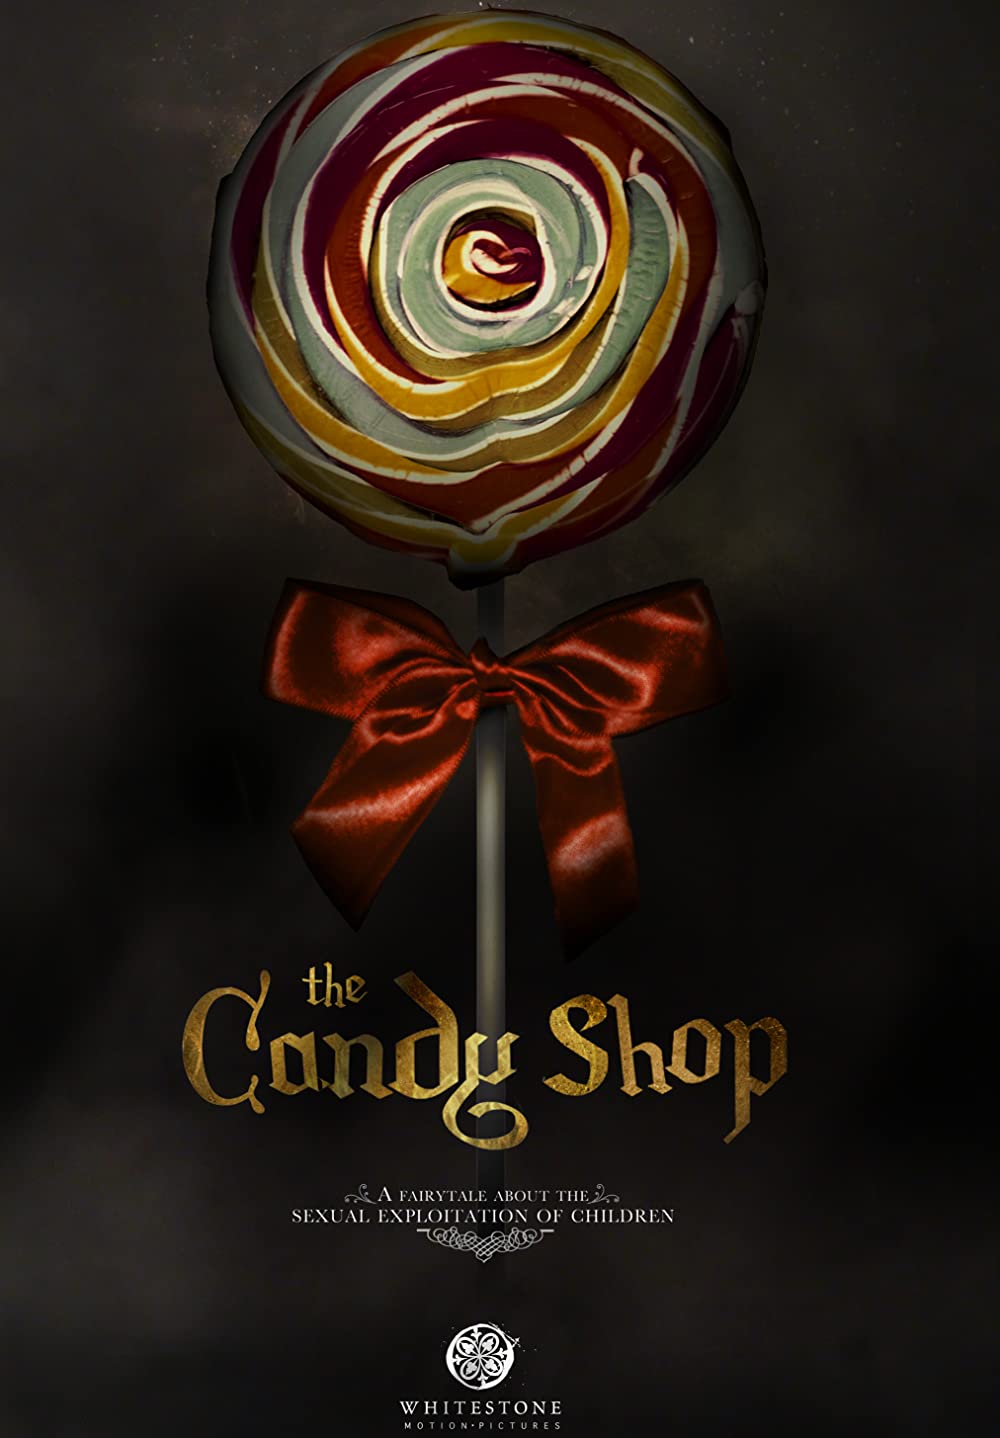 The Candy Shop (Short 2010)